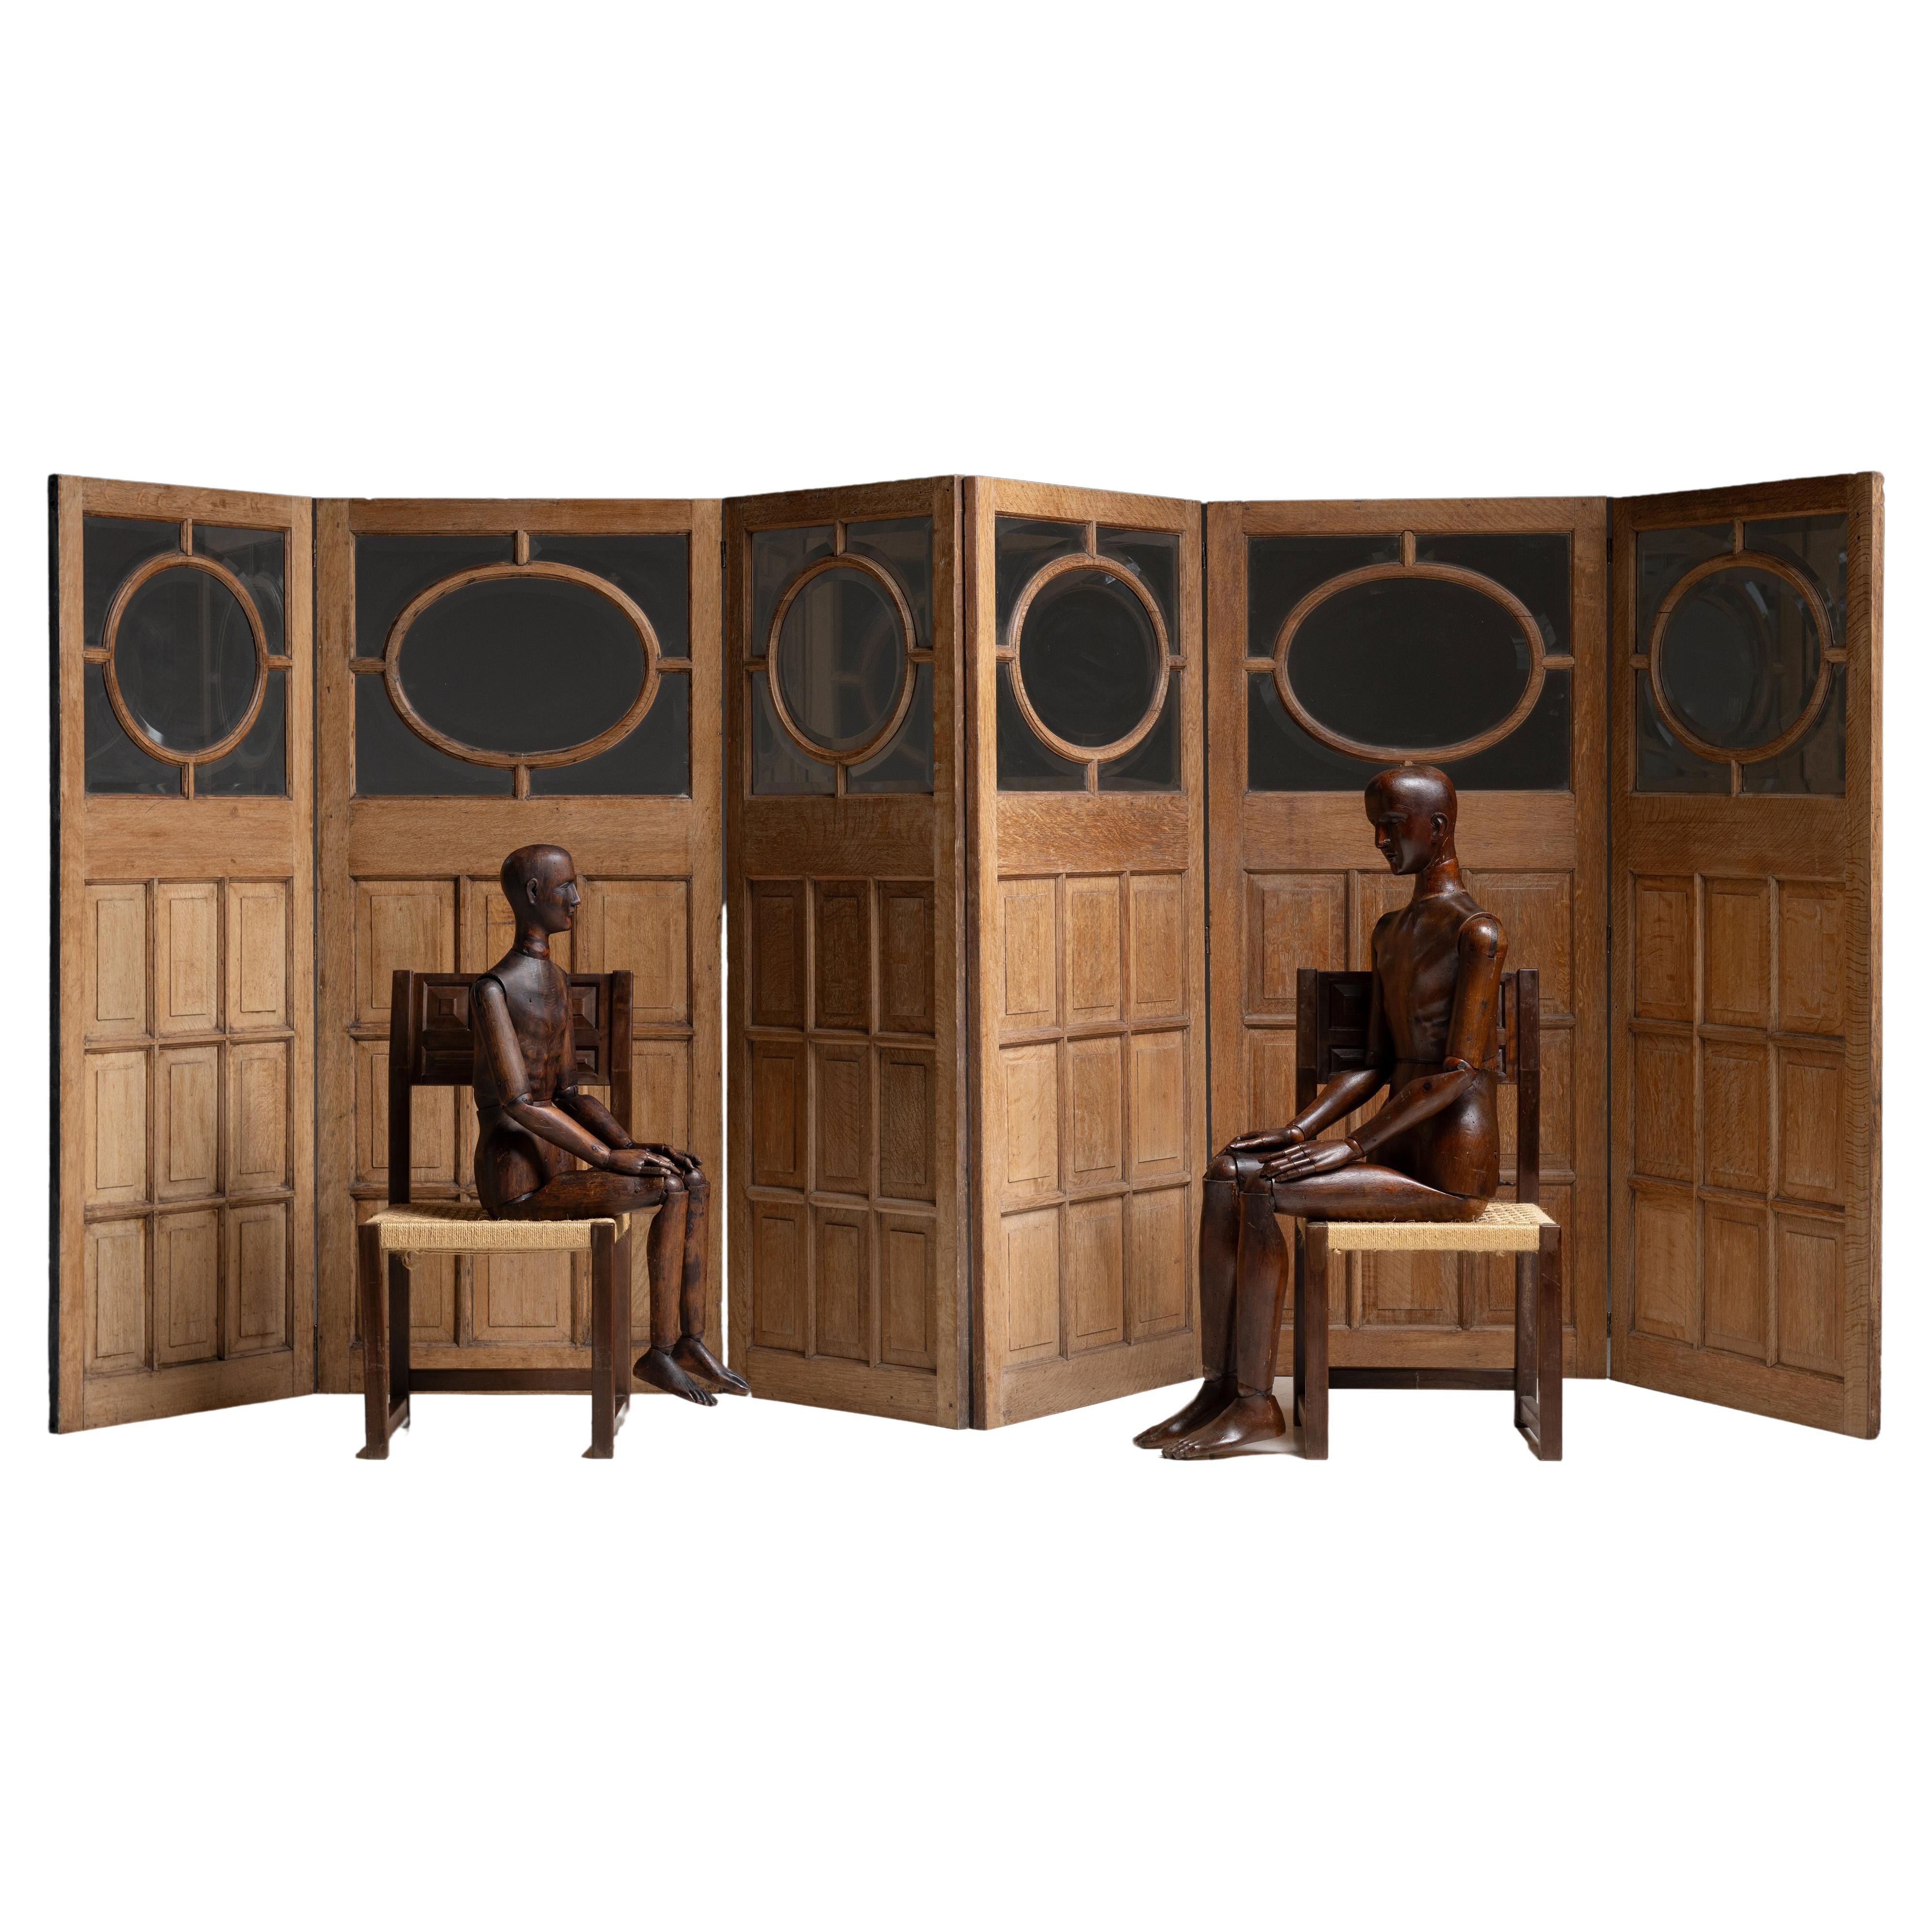 Oak & Glass Room Dividers

England circa 1890

Paneled oak doors with beveled glass and brass hardware.

84.5